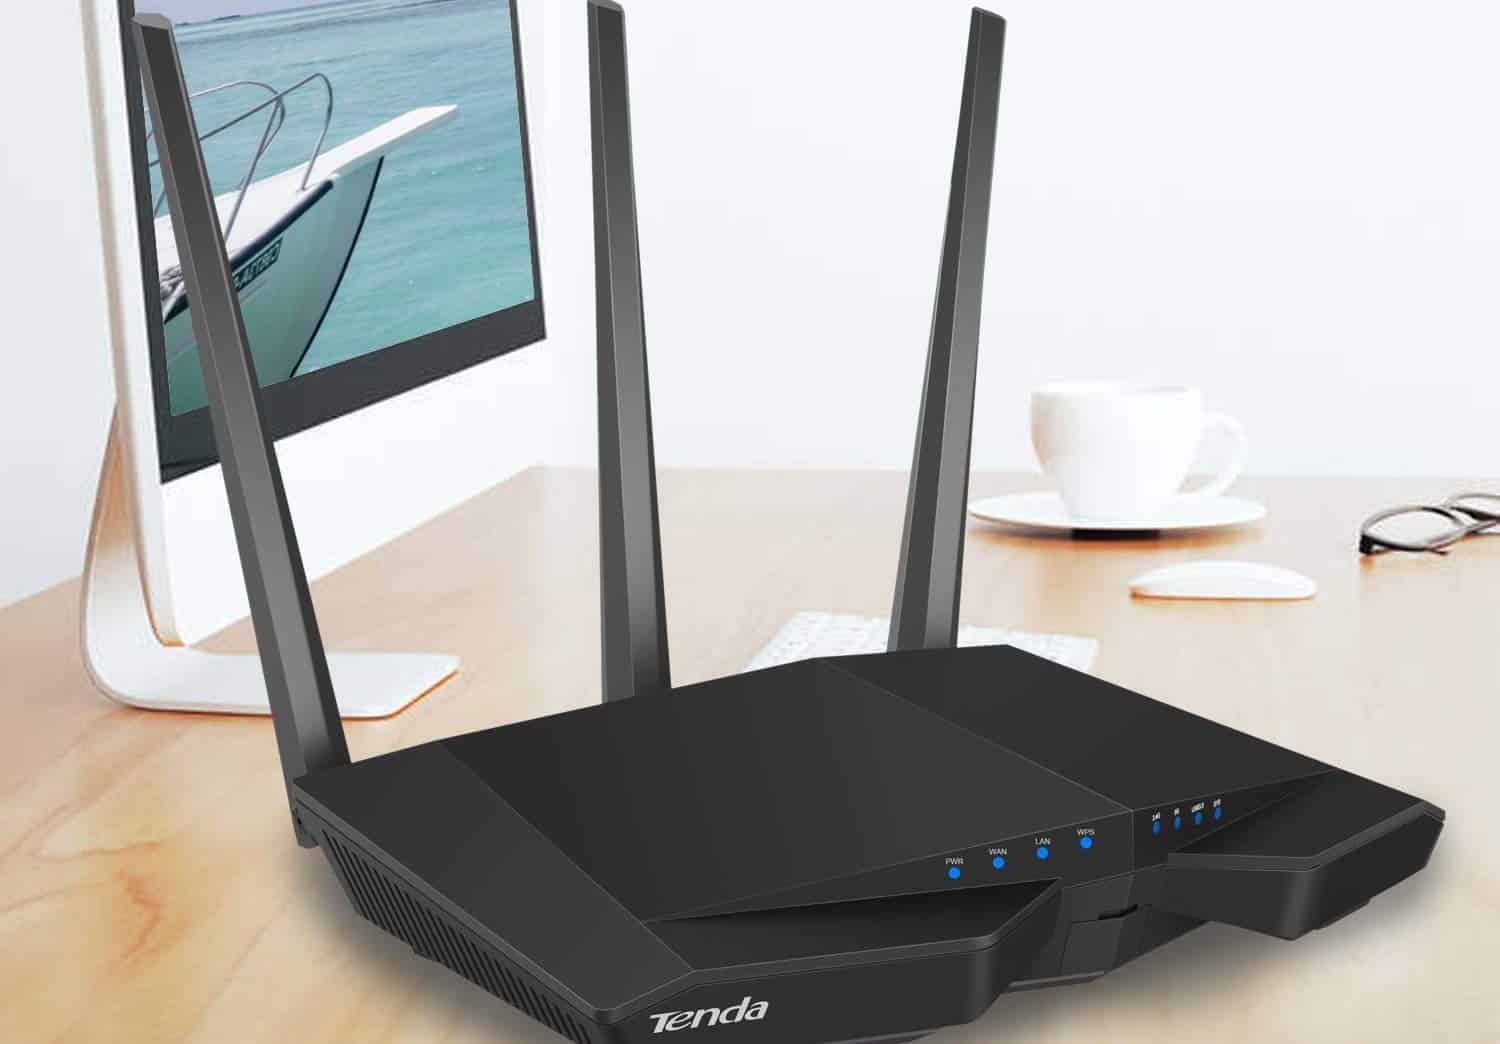 Top 10 Best Long Range Wifi Routers in 2022 Reviews | Buyer's Guide